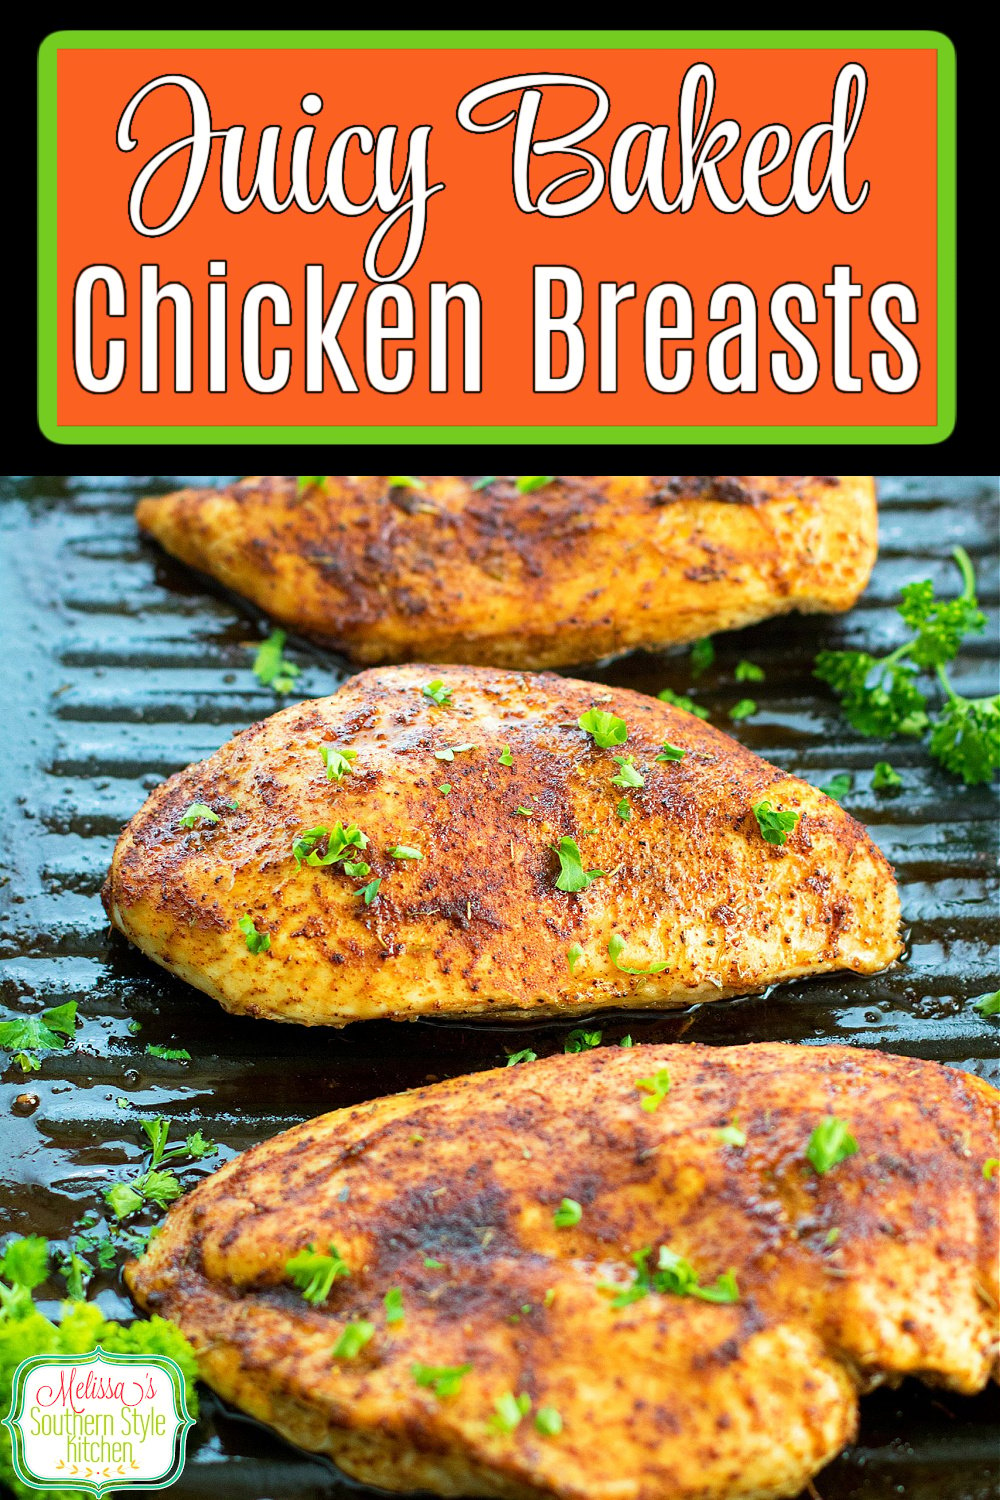 A flavorful spice rub takes these juicy baked chicken breasts to another level of flavor #chickenbreast #chickenrecipes #easychickenrecipes #chickenbreastrecipes #roastchicken #juciychickenrecipes #dinner #dinnerideas #southernfood #southernrecipes via @melissasssk